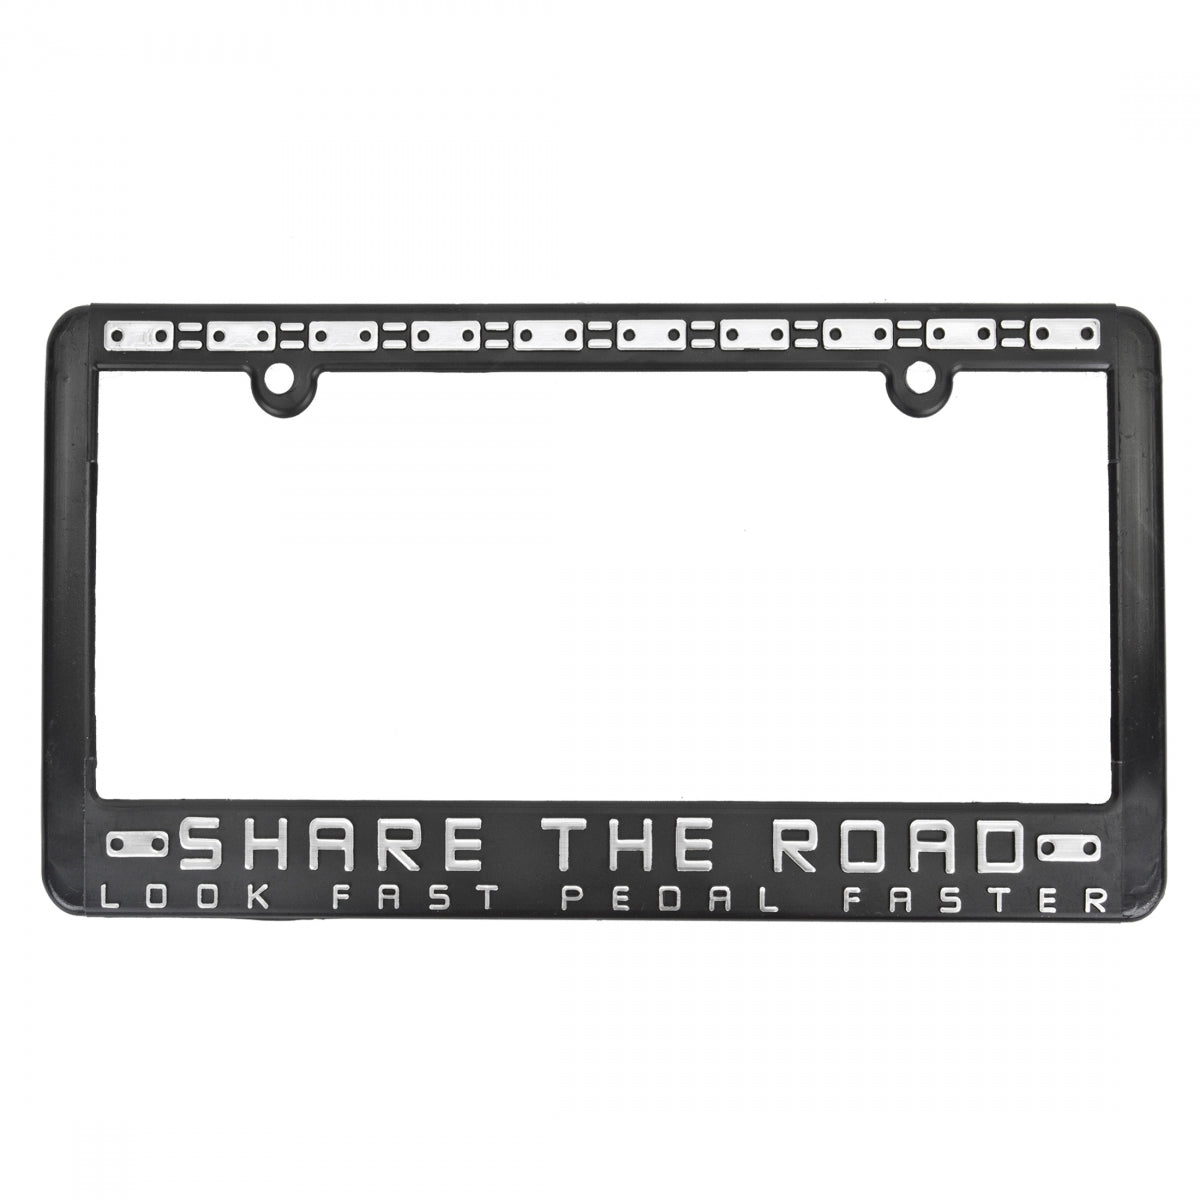 SHARE THE ROAD LICENSE PLATE FRAME SHARE-THE ROAD